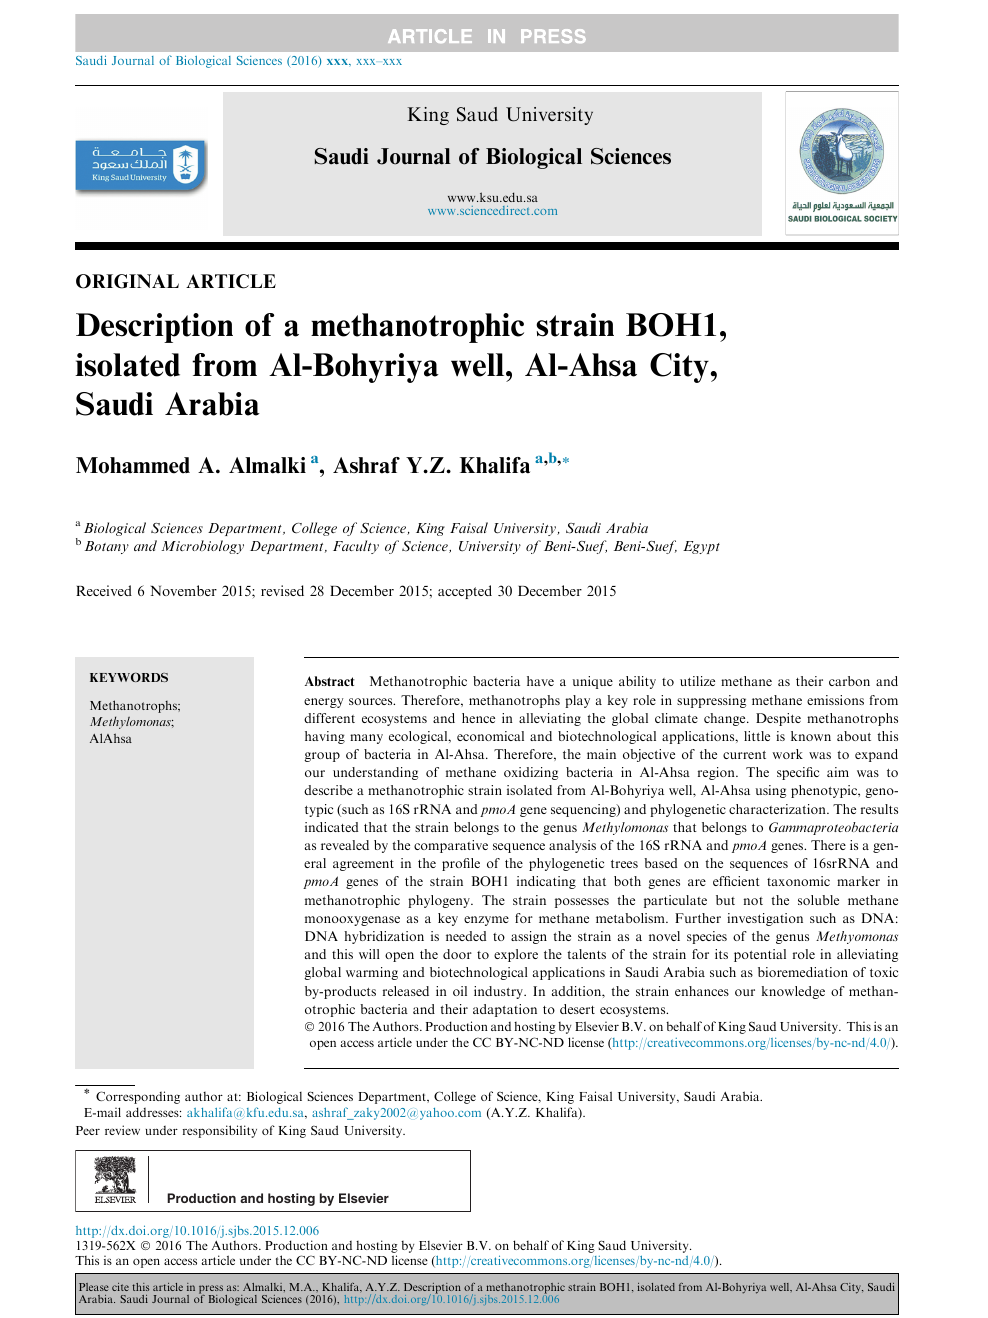 Description Of A Methanotrophic Strain Boh1 Isolated From Al Bohyriya Well Al Ahsa City Saudi Arabia Topic Of Research Paper In Chemical Sciences Download Scholarly Article Pdf And Read For Free On Cyberleninka